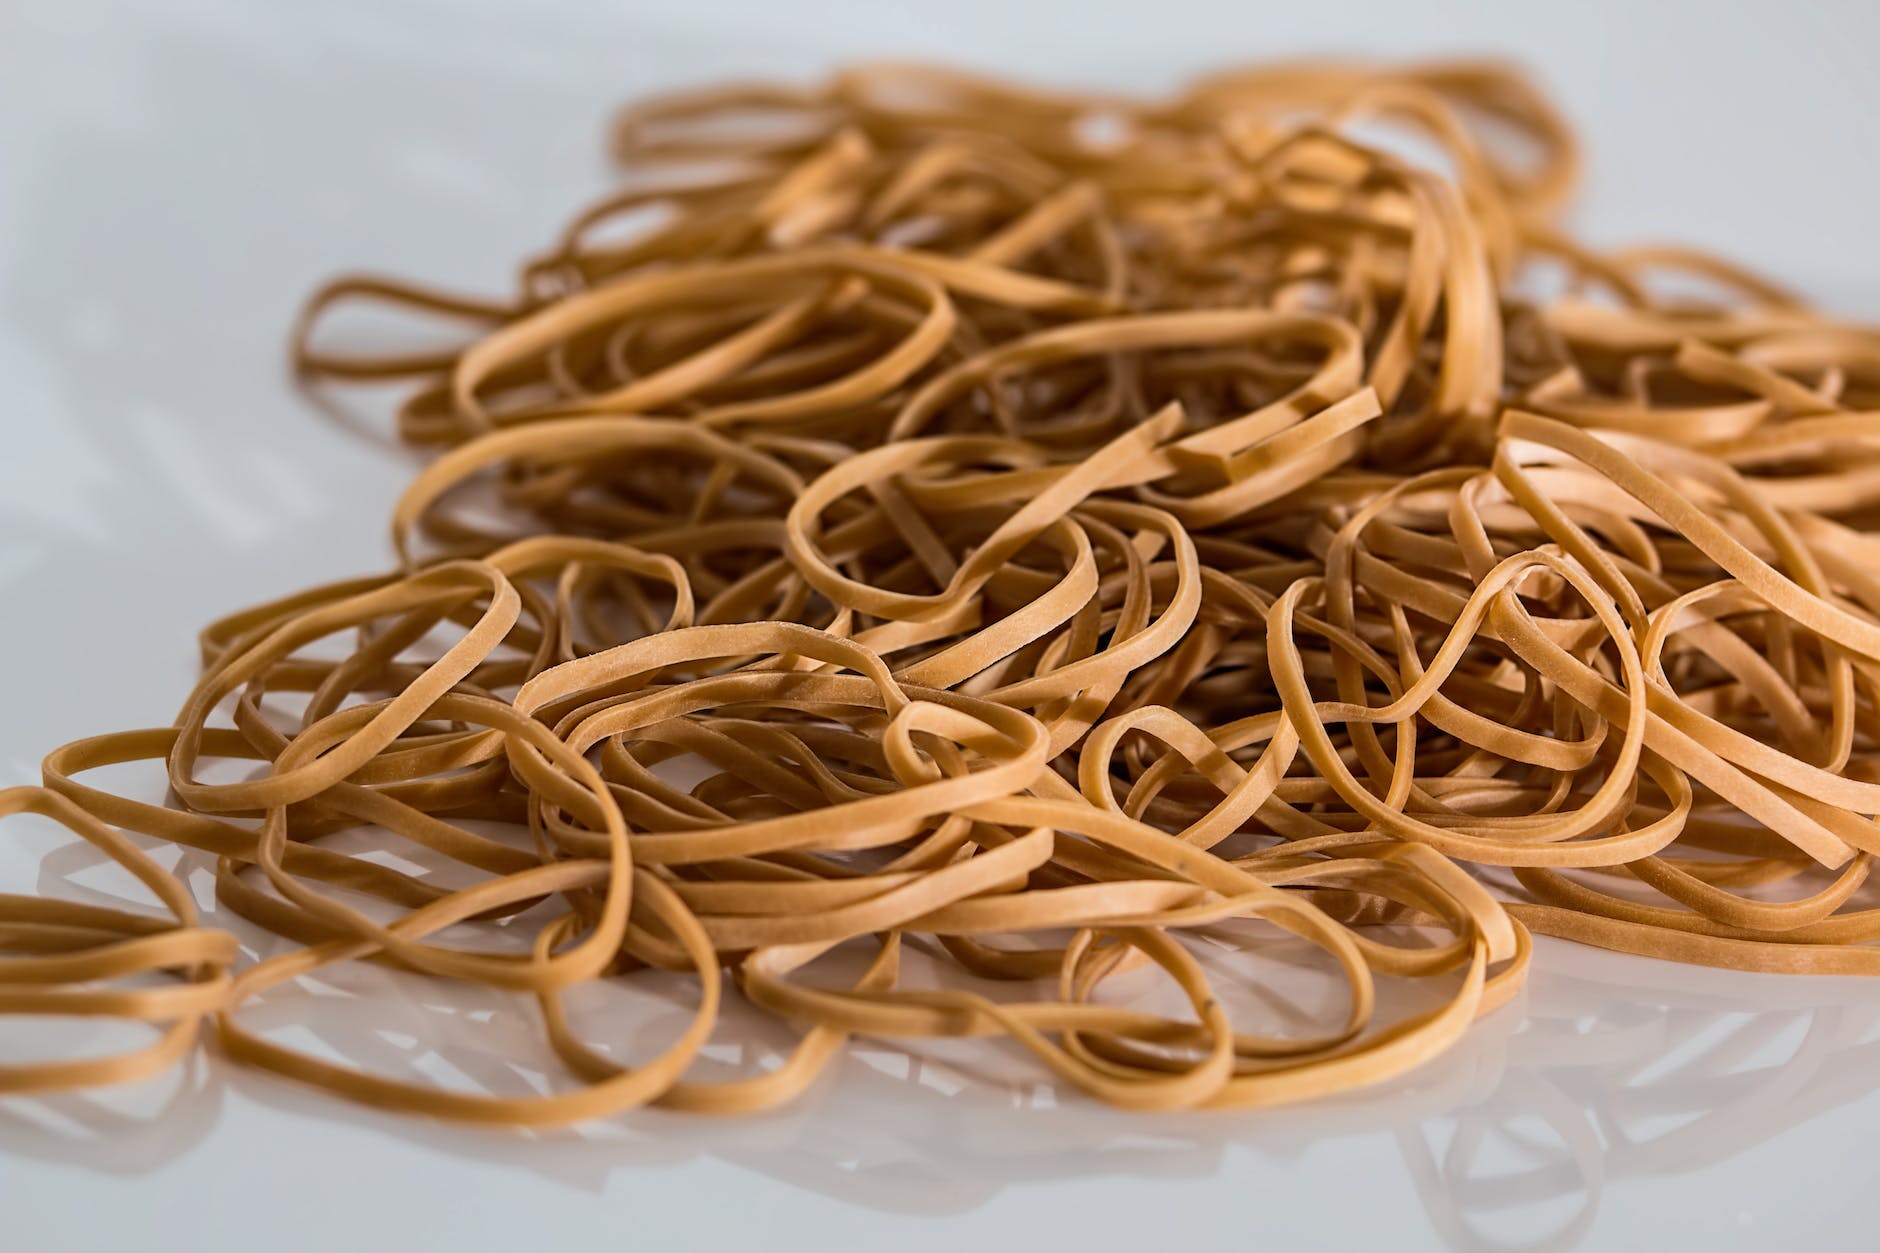 How can you prevent your cat from swallowing a rubber band or hair tie?